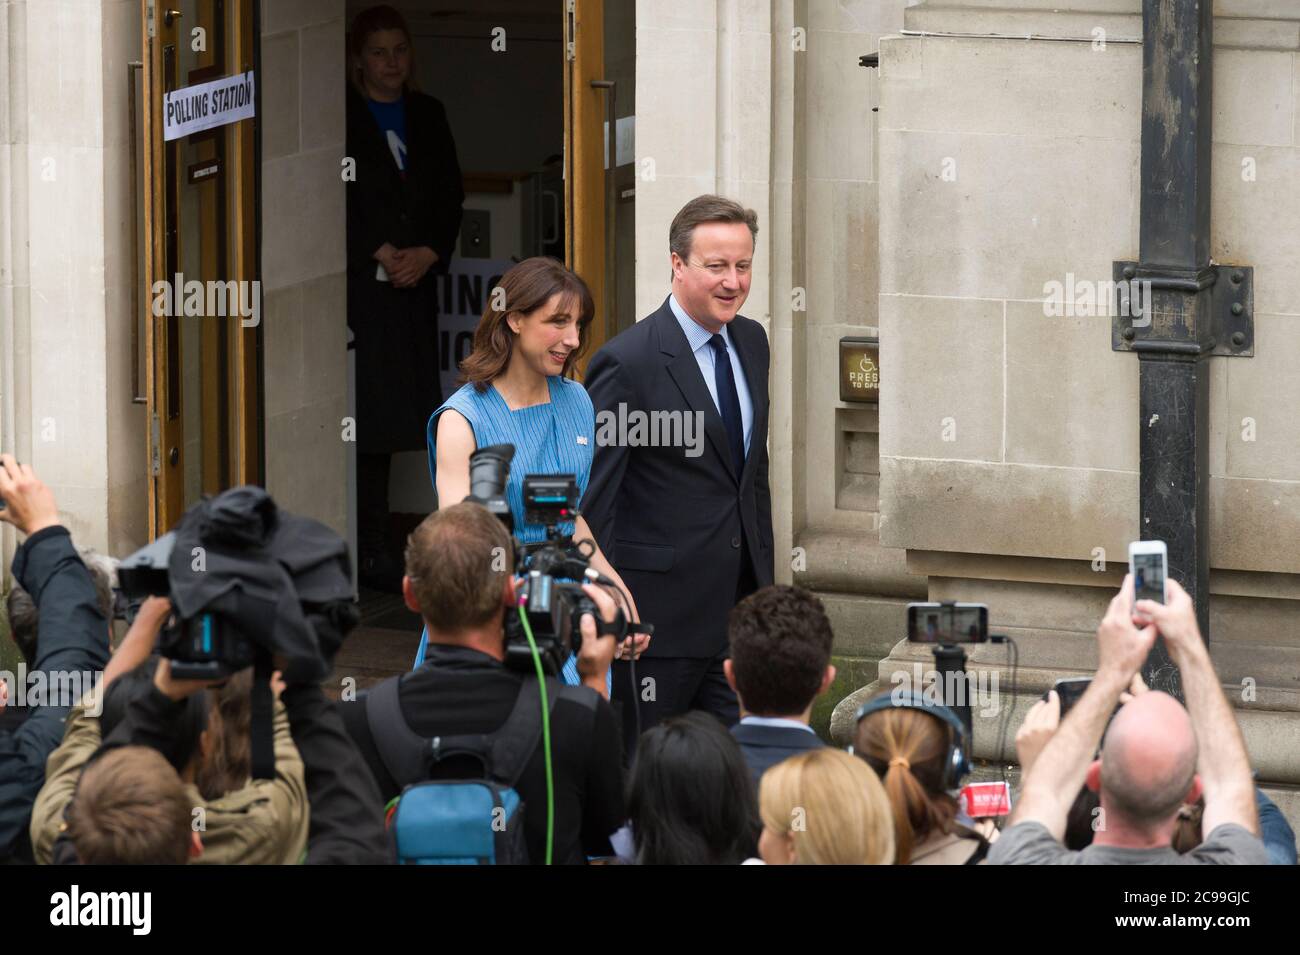 British Prime Minister David Cameron leaving with his wife Samantha after voting in the British referendum on whether to remain part of European Union or leave, Methodist Central Hall Westminster, London, UK.  23 Jun 2016 Stock Photo